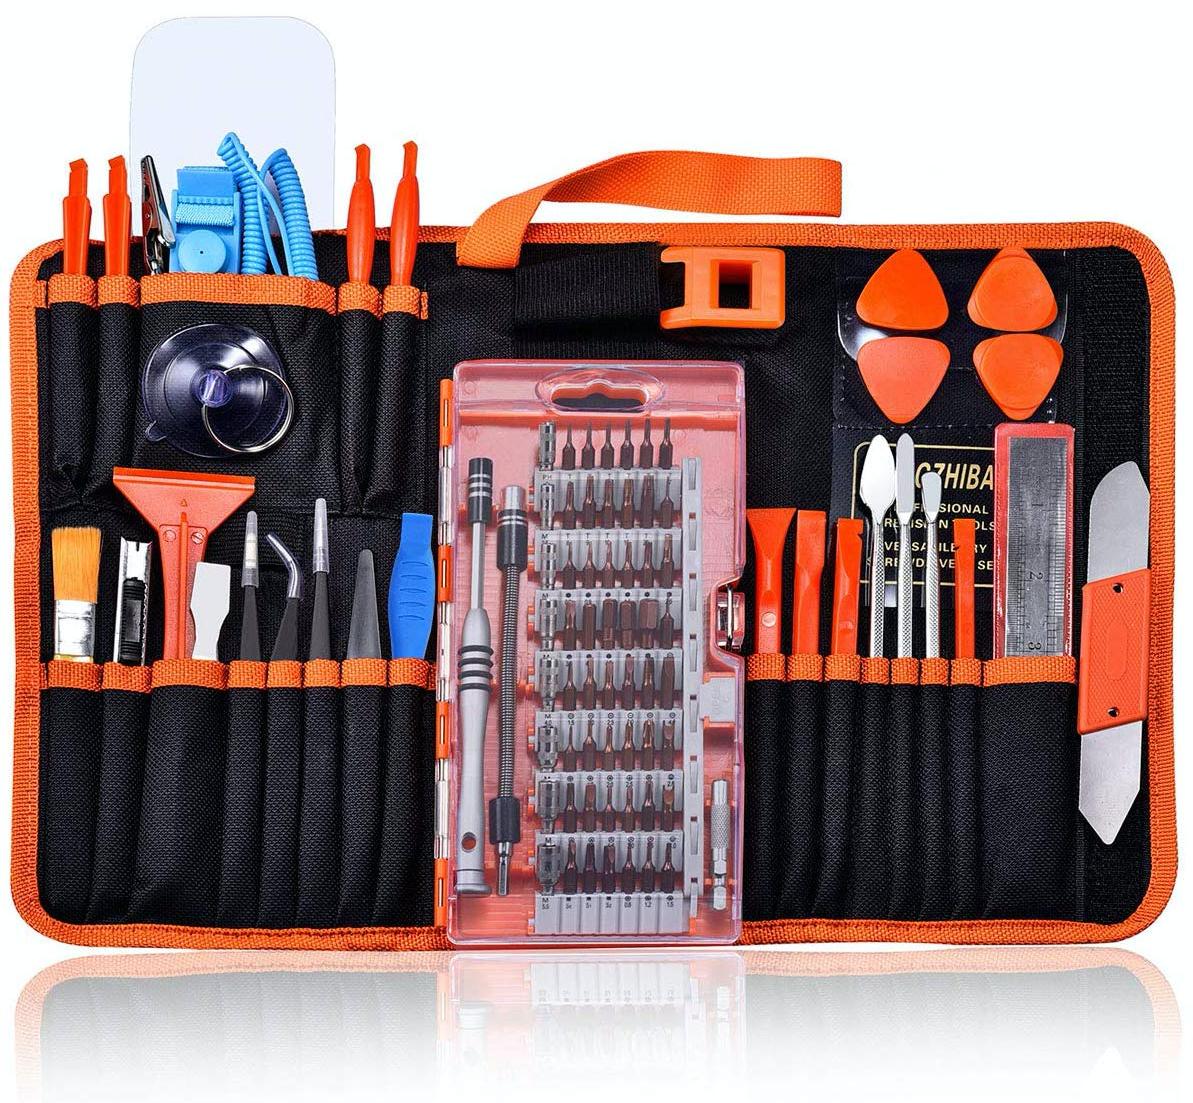 Hyx Tool Kits JF-8161 8 in 1 Battery Repair Tool Set for iPhone 6